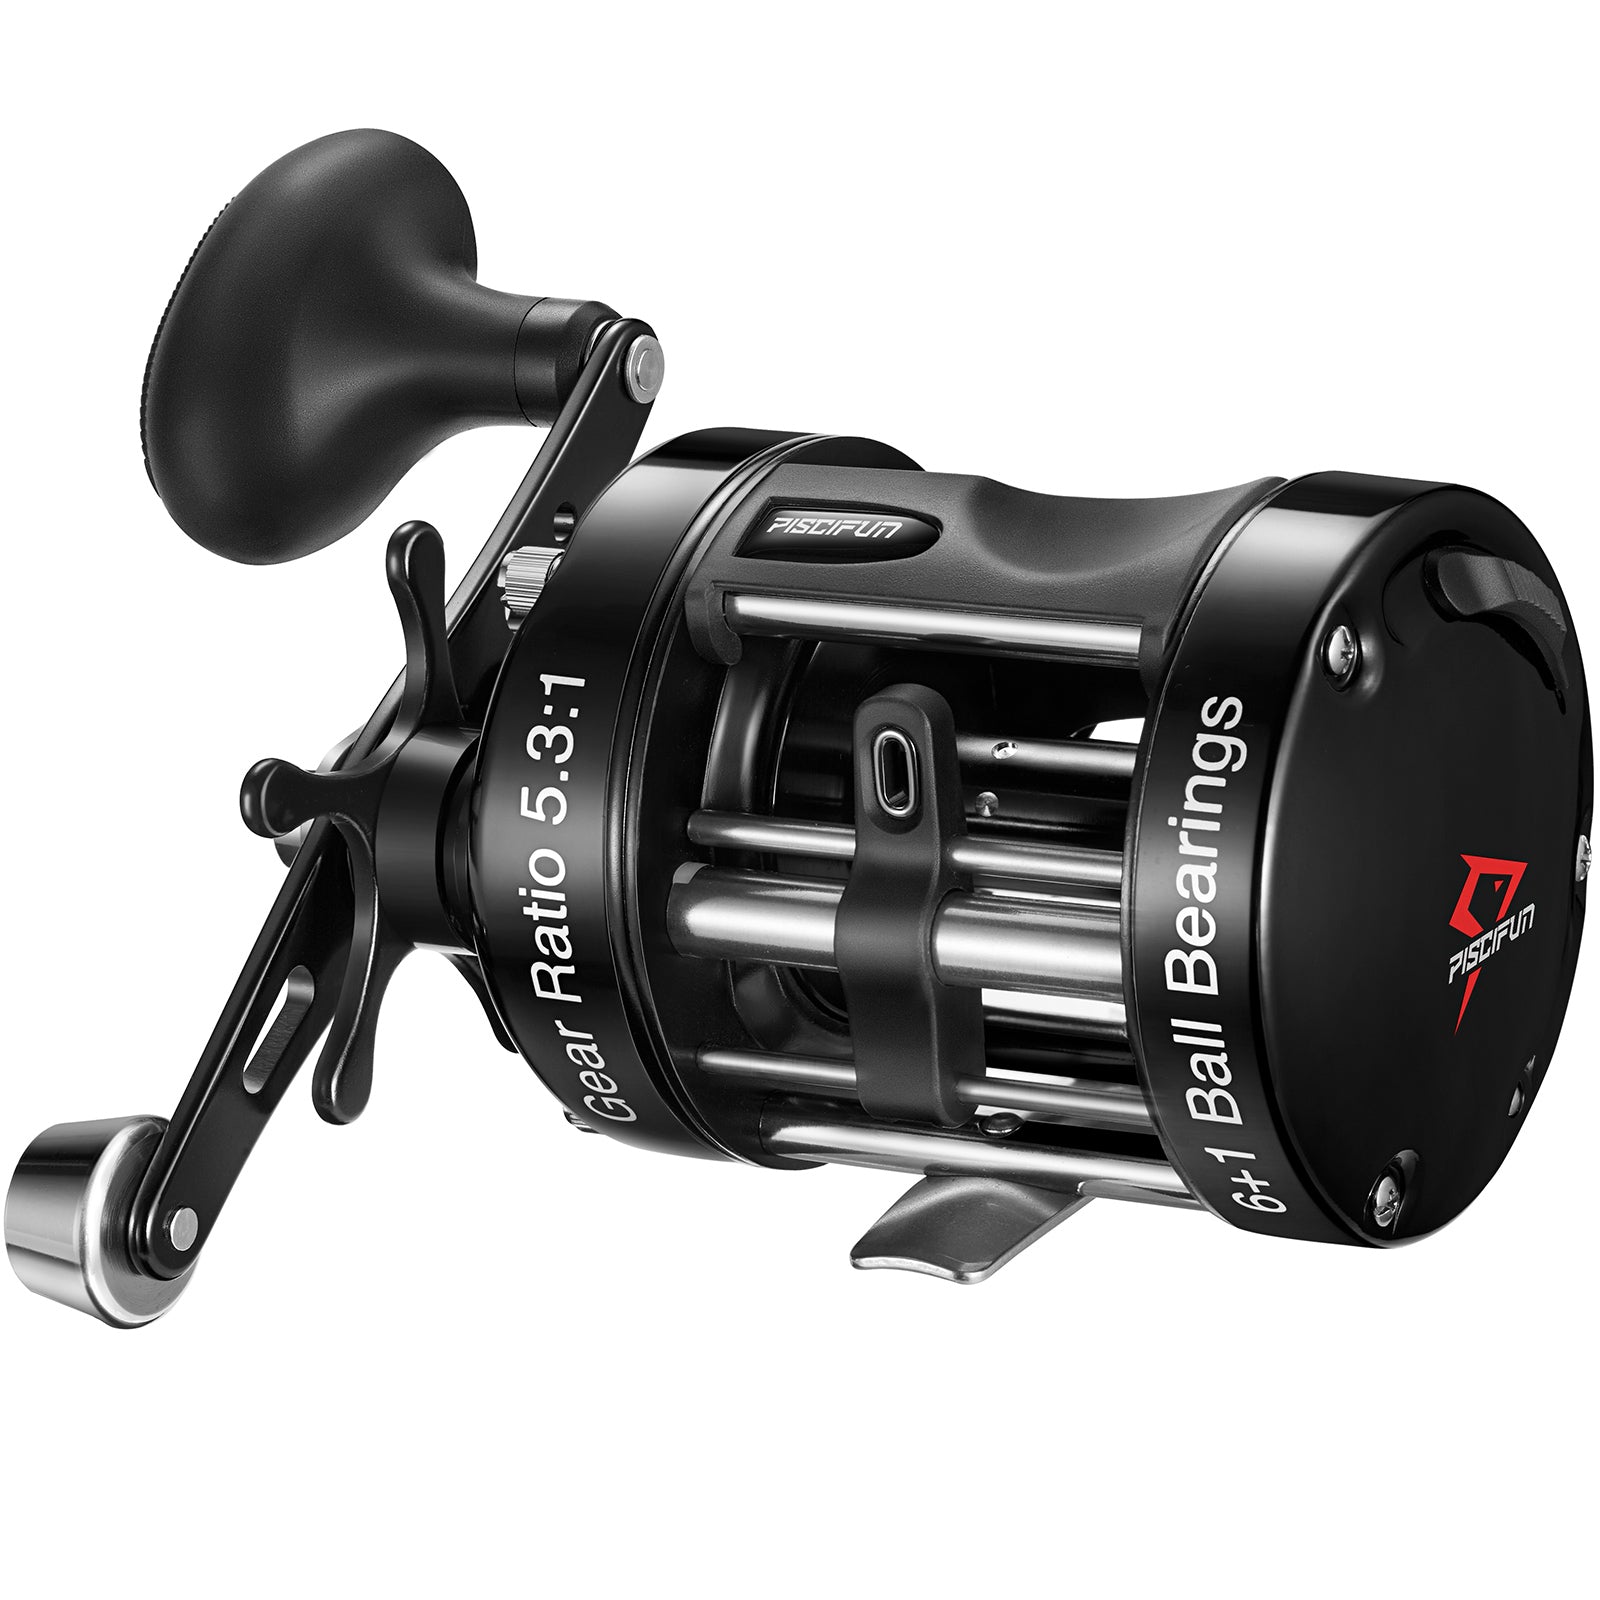 saltwater fishing reel, saltwater fishing reel Suppliers and Manufacturers  at